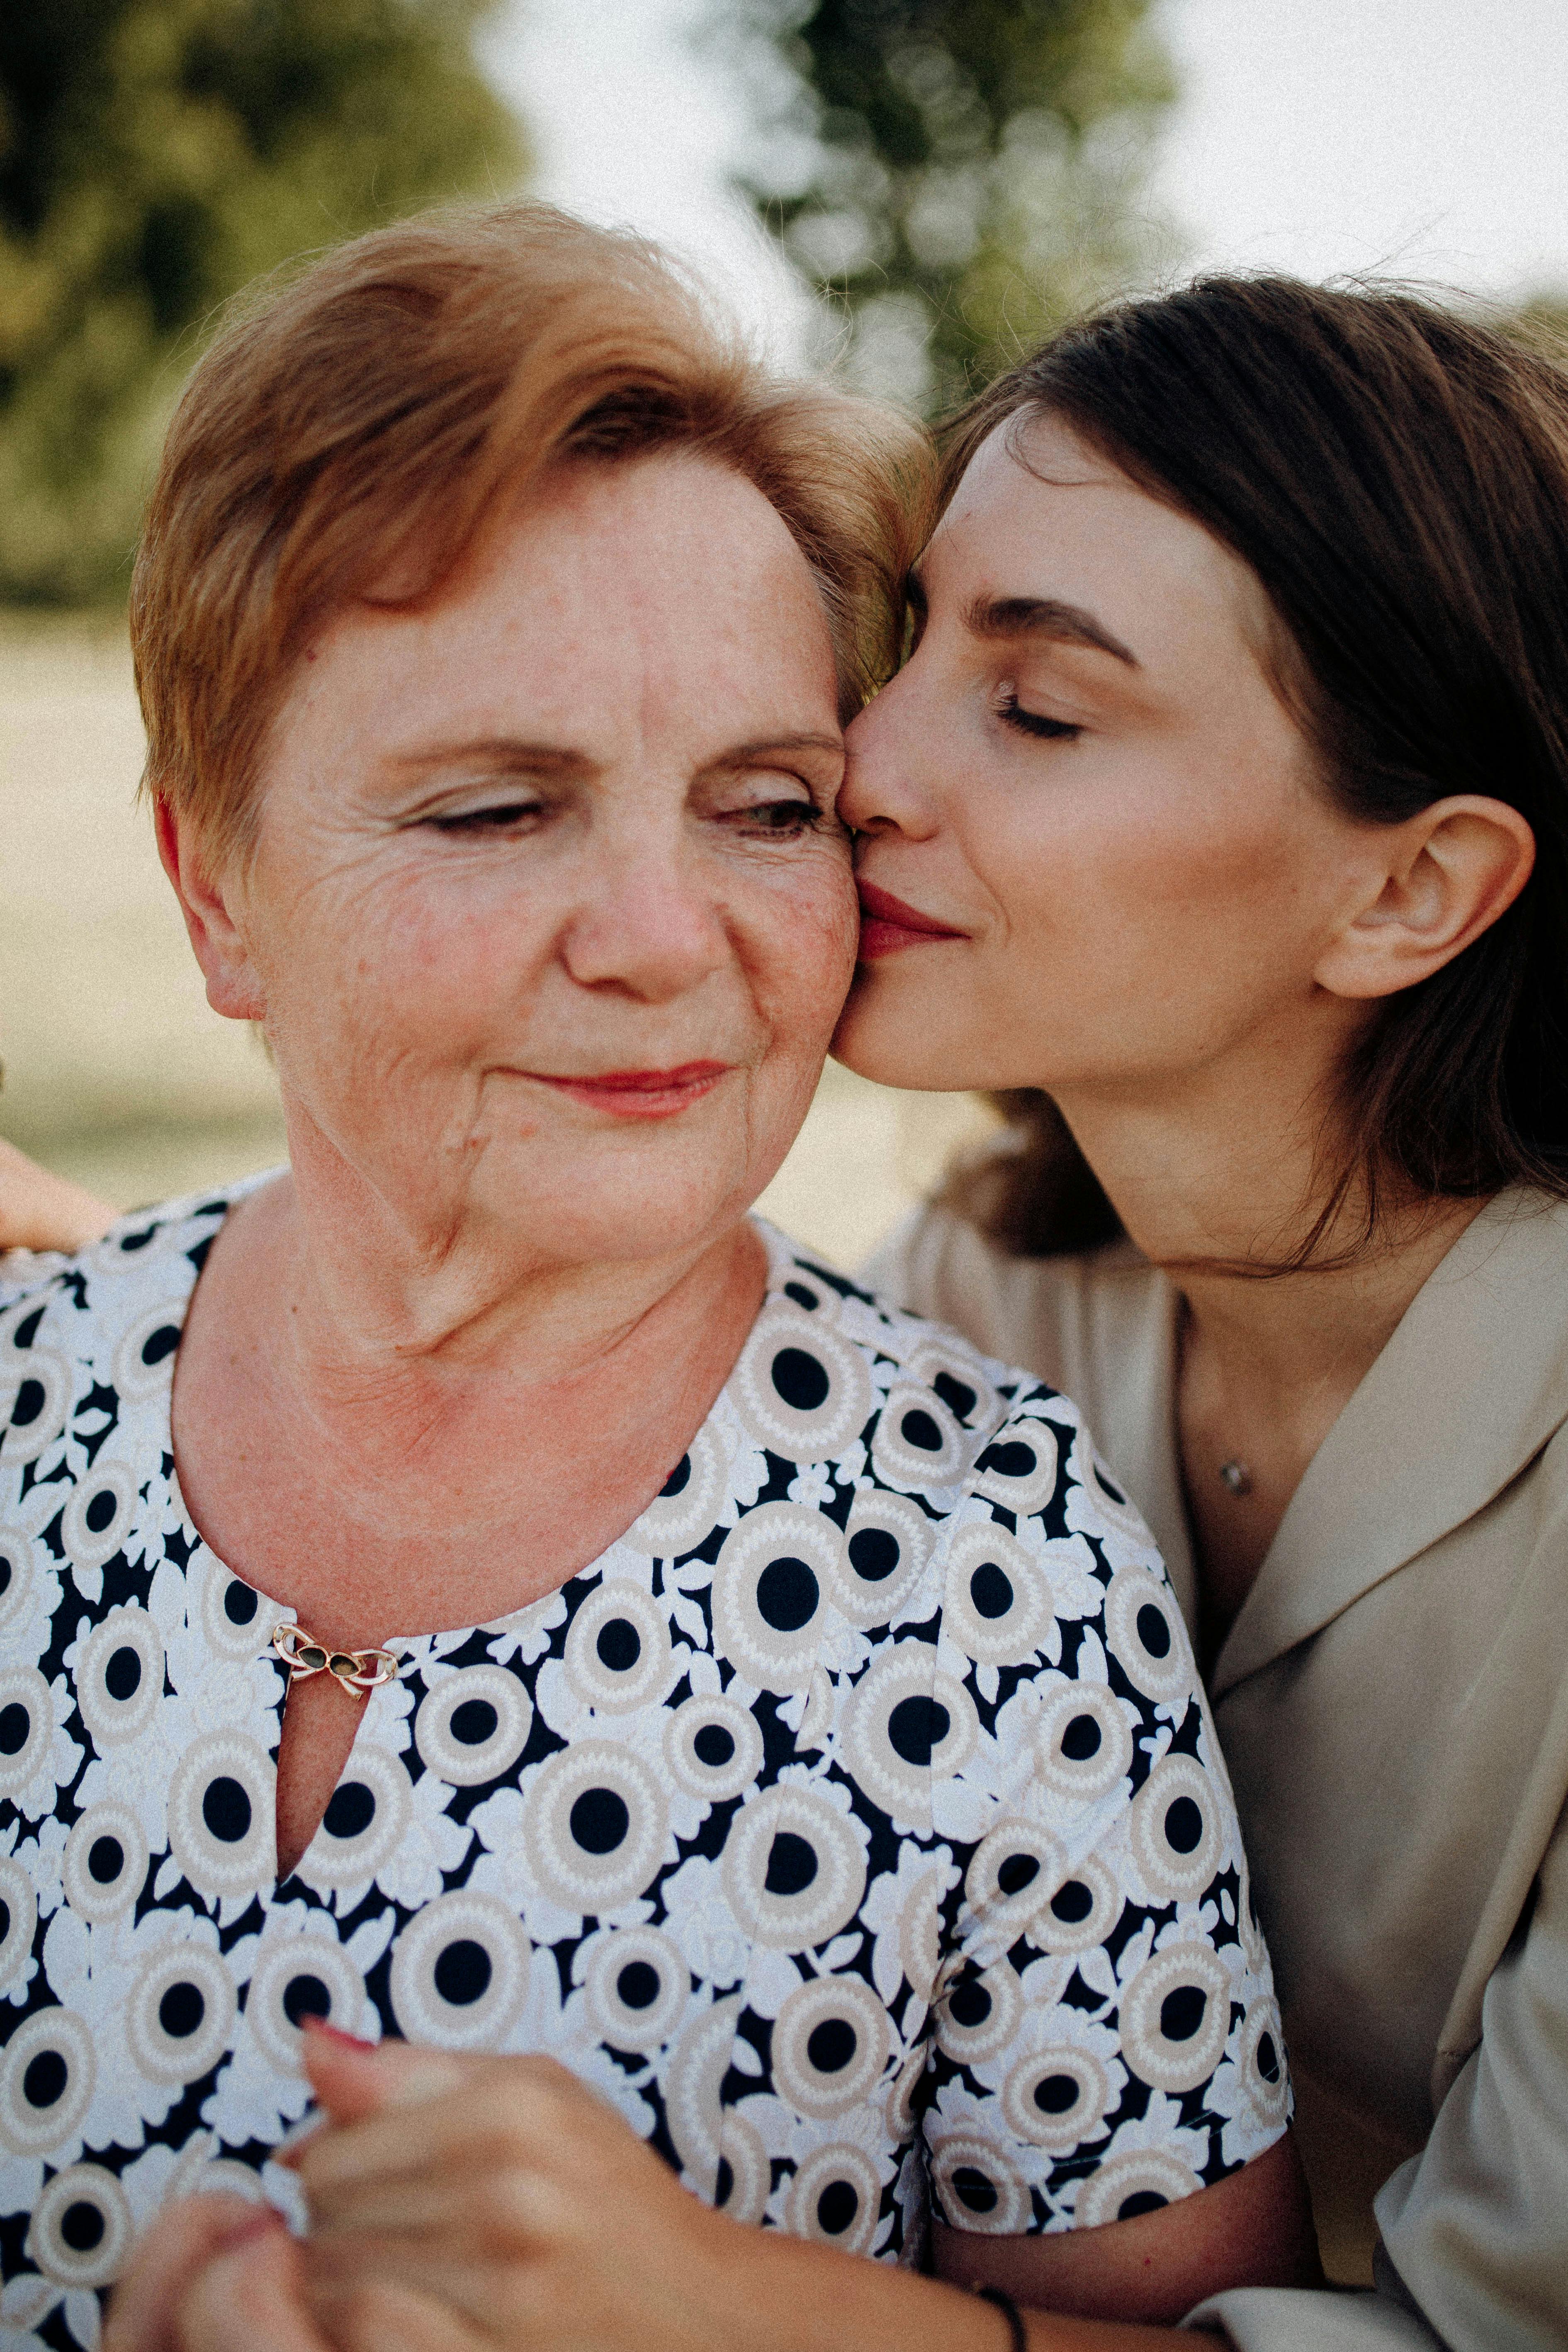 A young woman kissing an older woman on the cheek | Source: Pexels